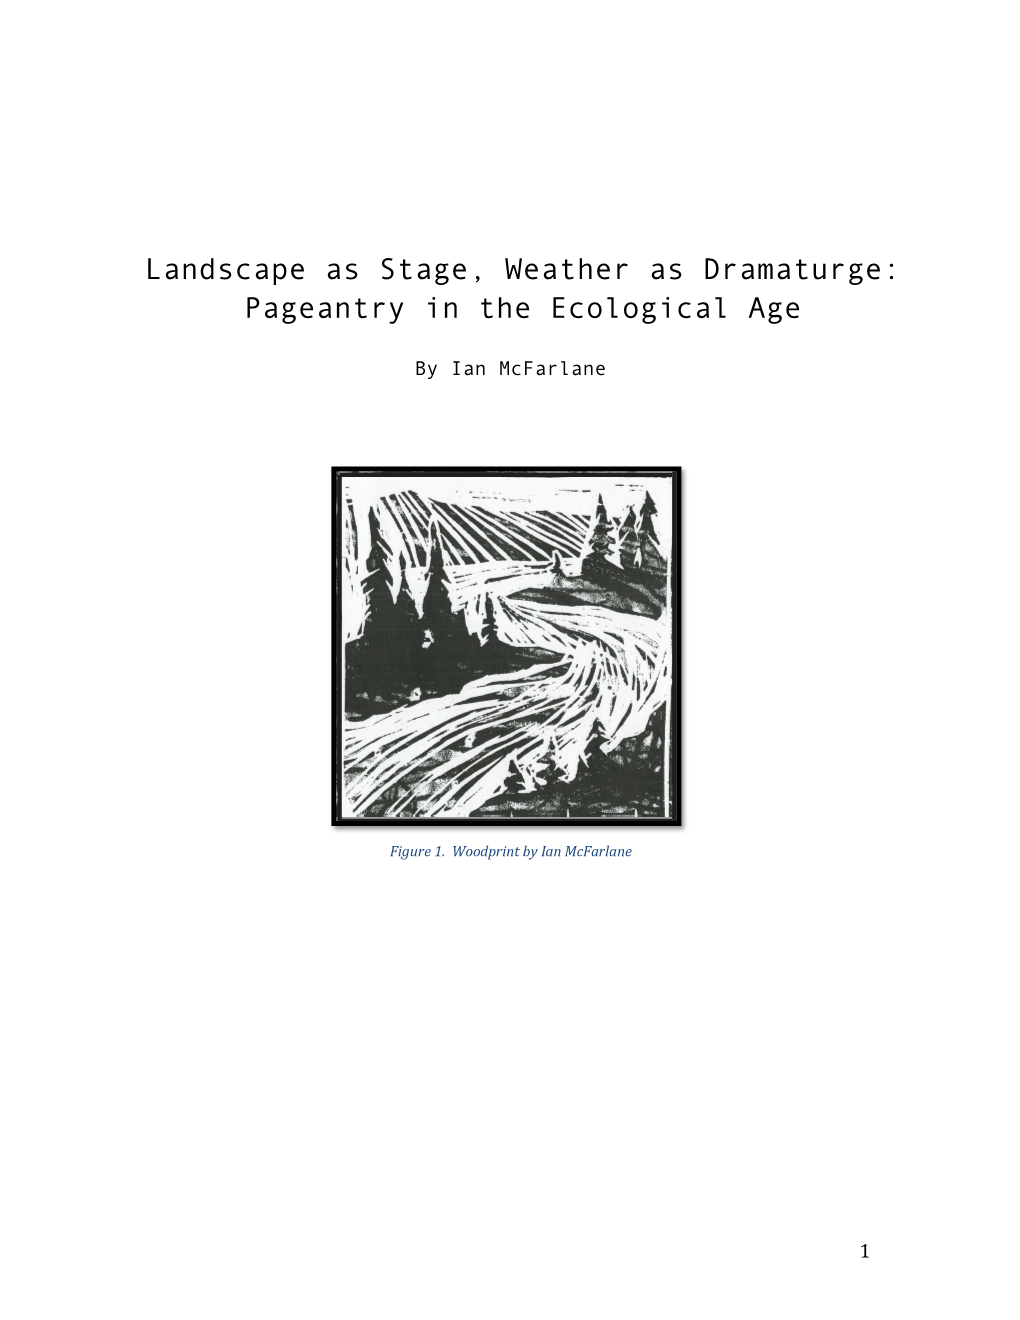 Landscape As Stage, Weather As Dramaturge: Pageantry in the Ecological Age